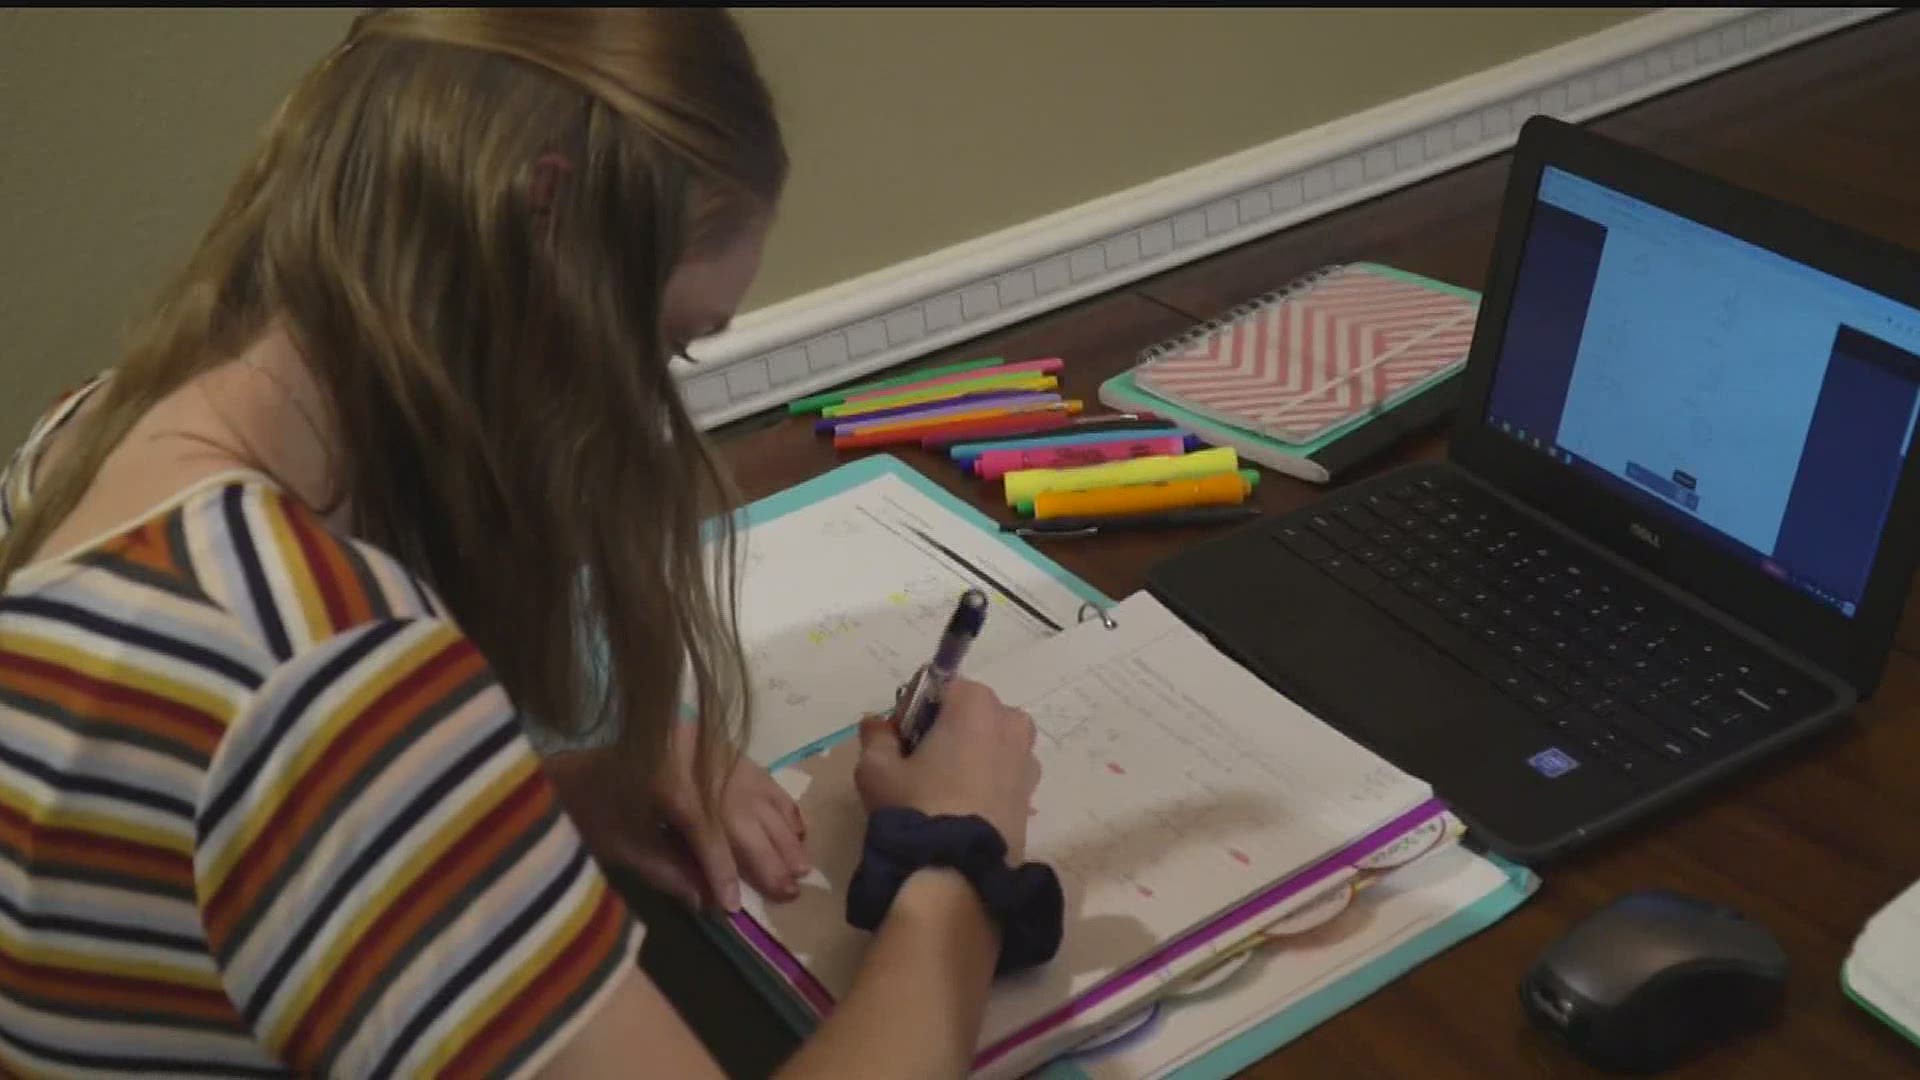 As the school district starts fully online, a teacher we spoke with is grateful for the extra time online while parents worry about the quality of education.